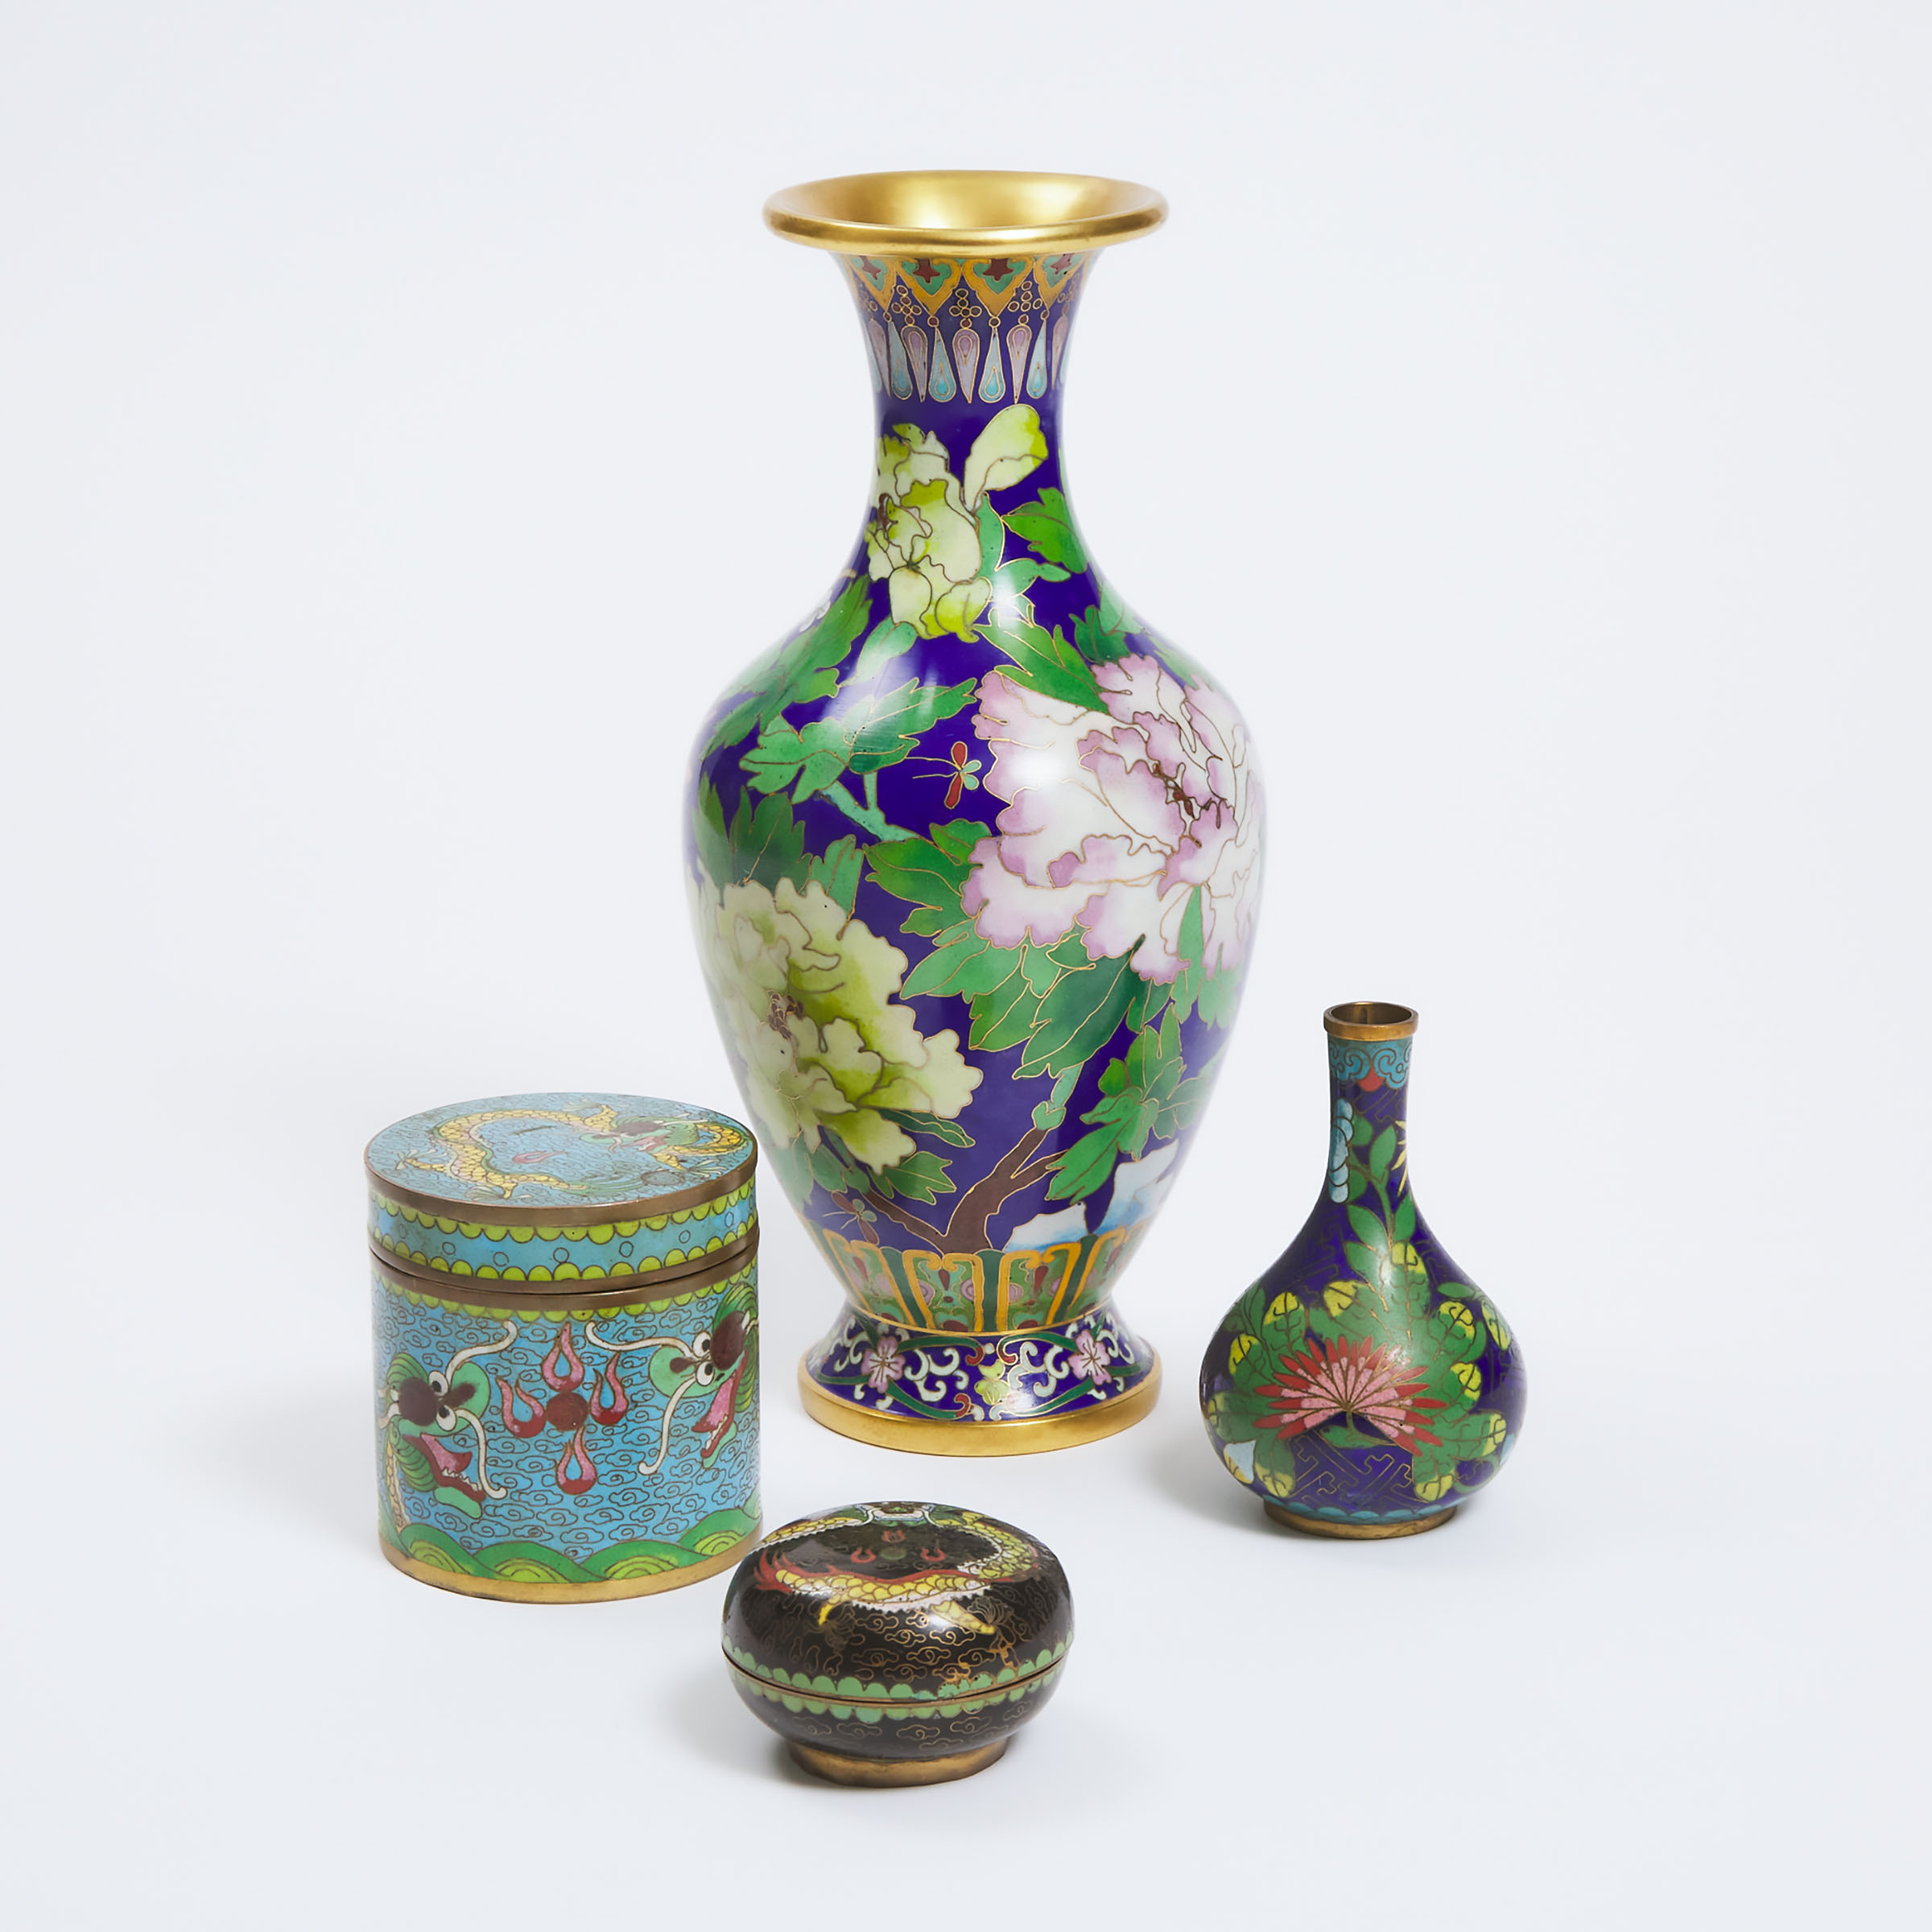 A Group of Four Chinese Cloisonné Wares, 19th/20th Century